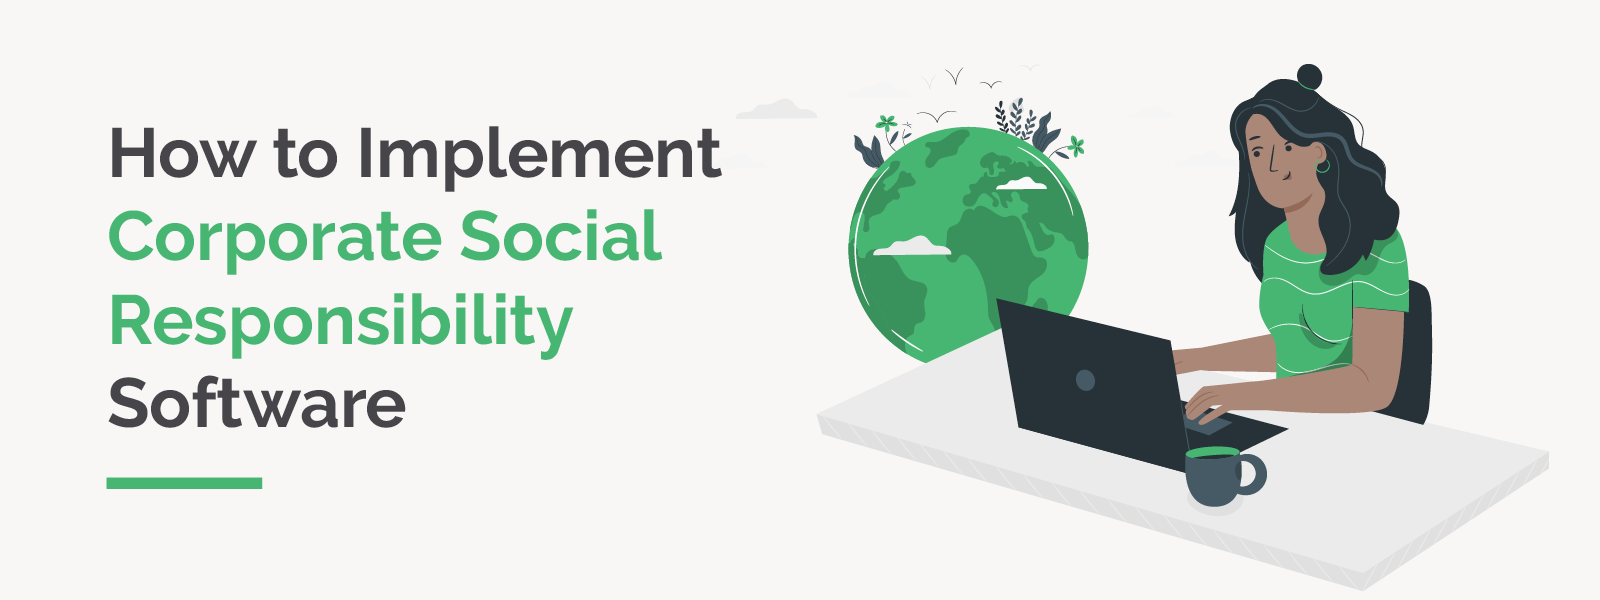 This article explores corporate social responsibility software and how to implement it.